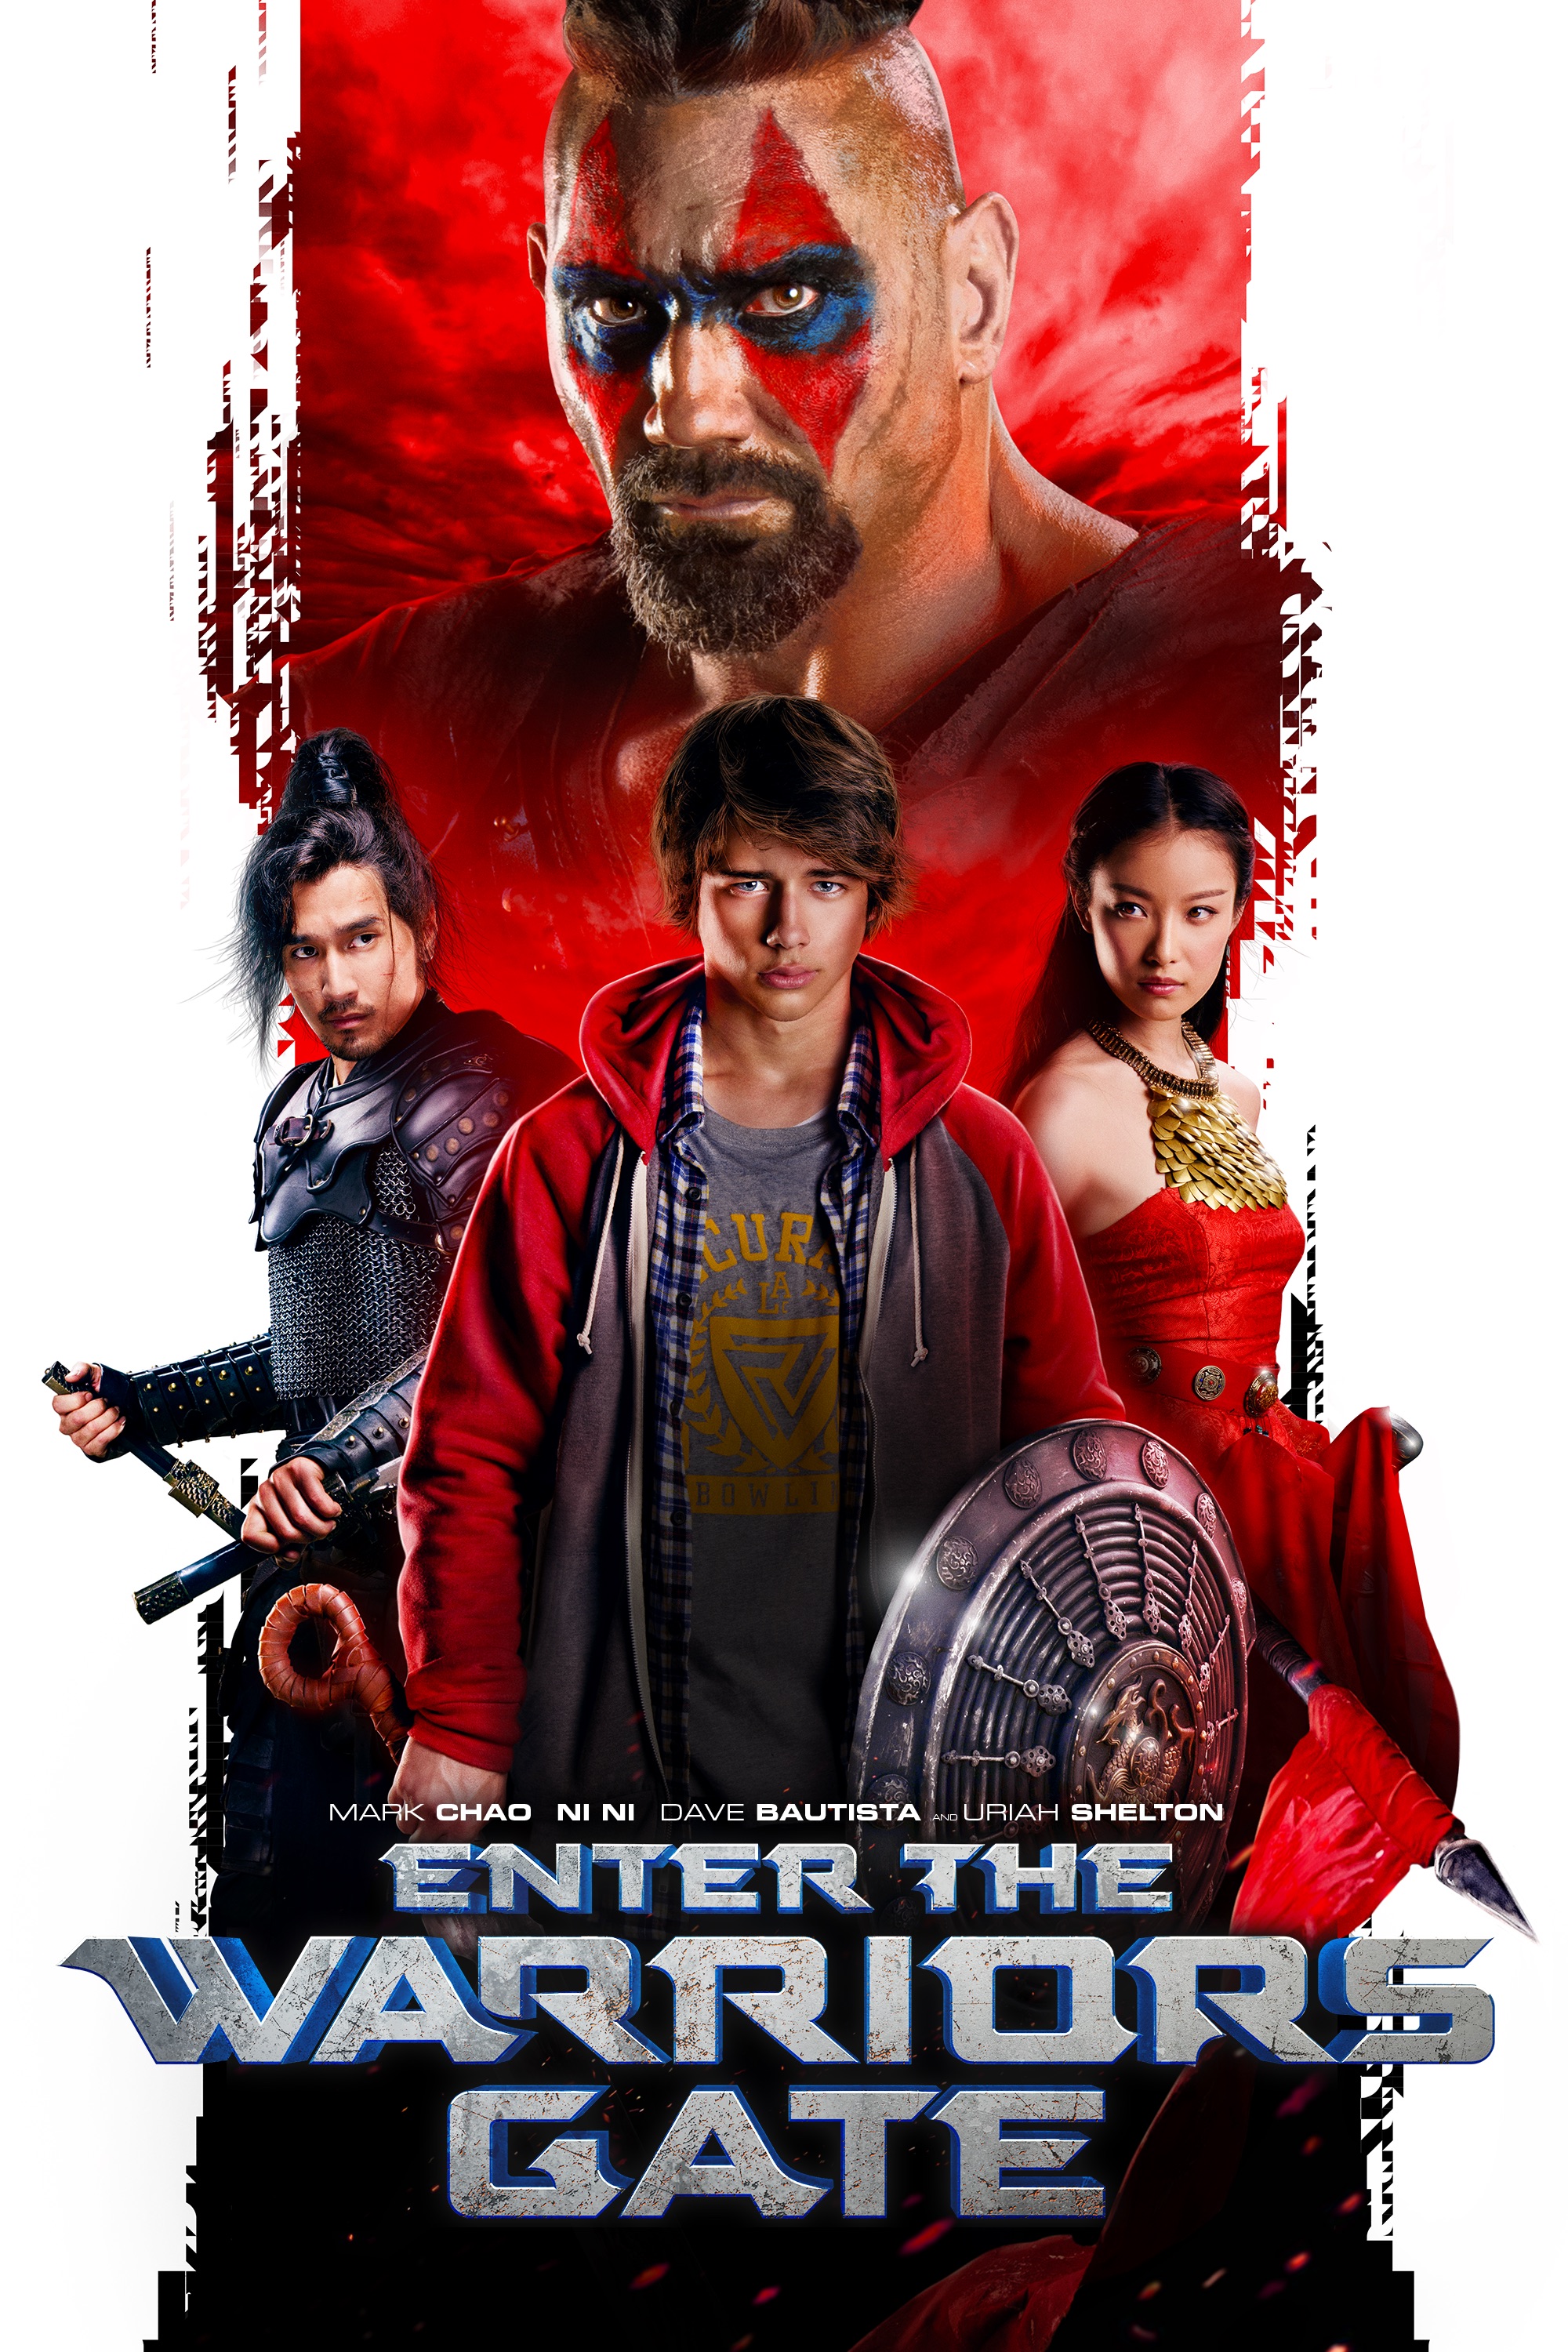 The great wall film ita download torrent pc